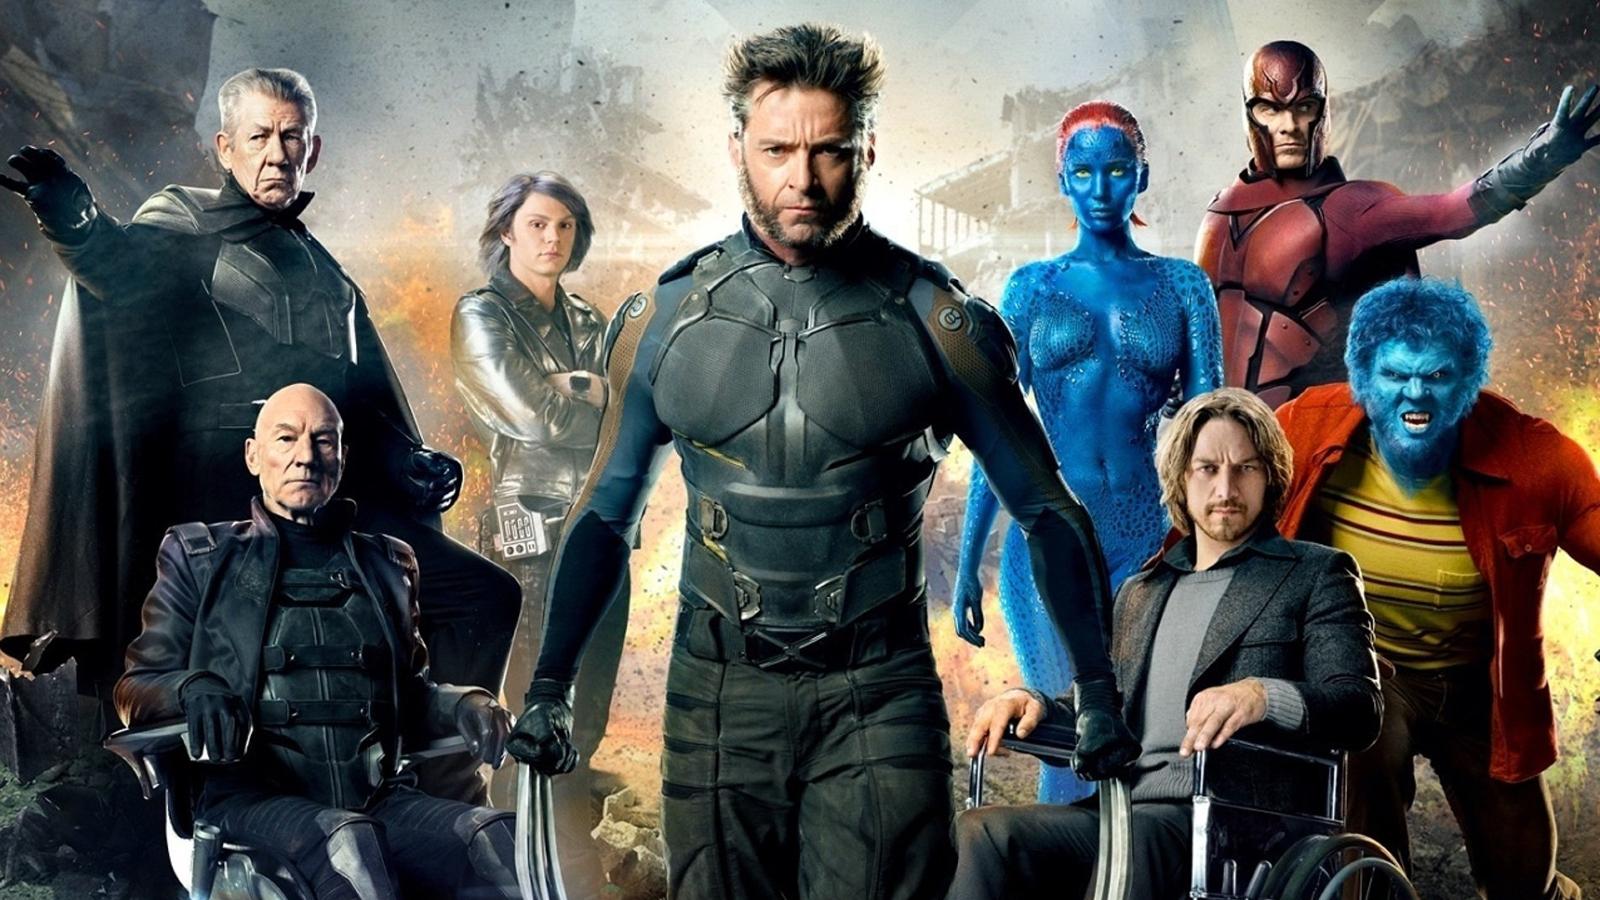 The cast of X-Men: Days of Future Past